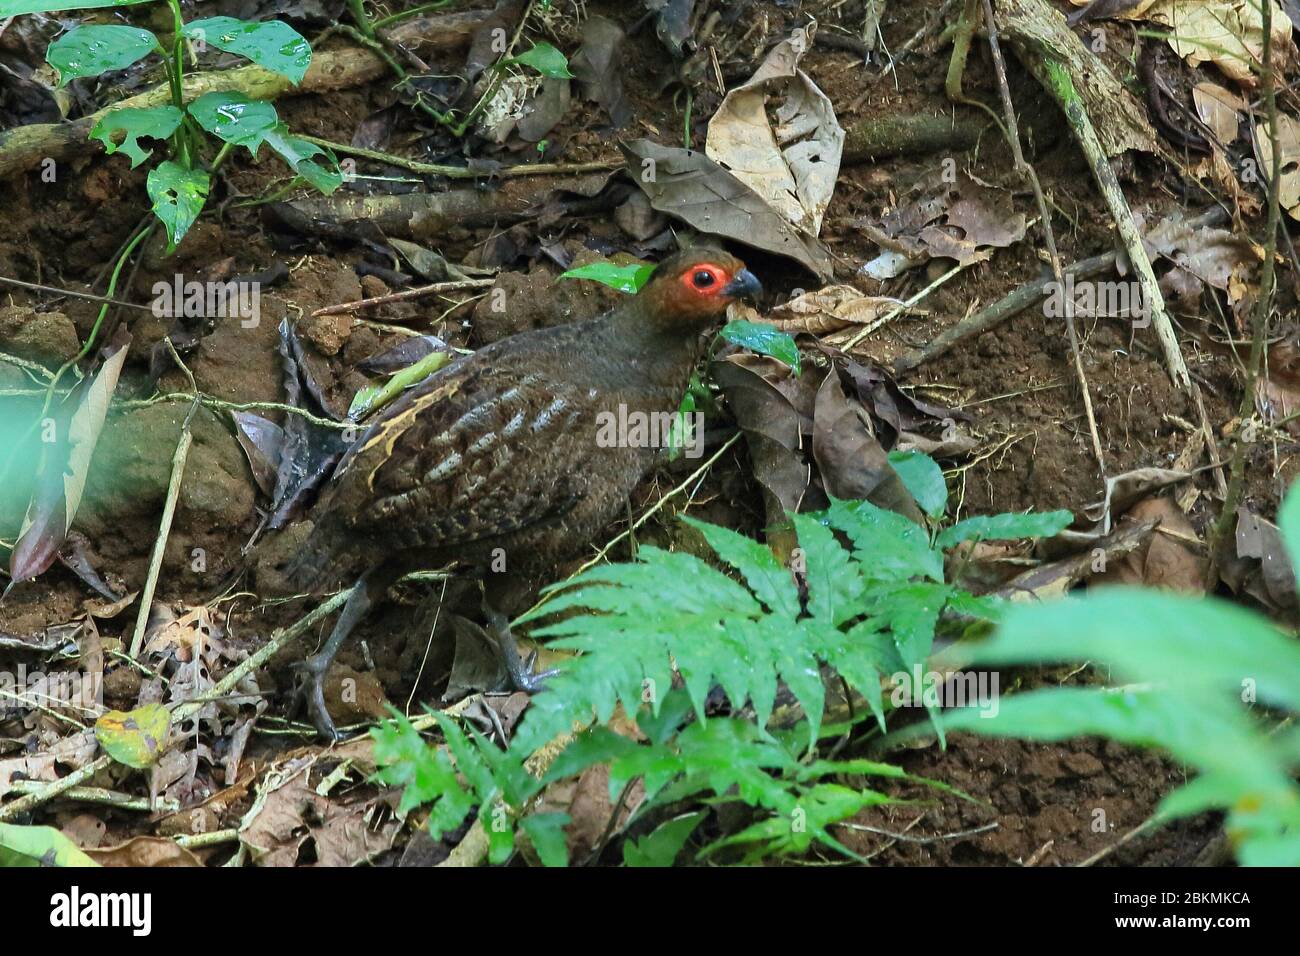 Adult Marbled Wood-quail (Odontophorus gujanensis) camouflaged on forest floor. Lowland rainforest, Corcovado National Park, Osa Peninsula, Costa Rica Stock Photo